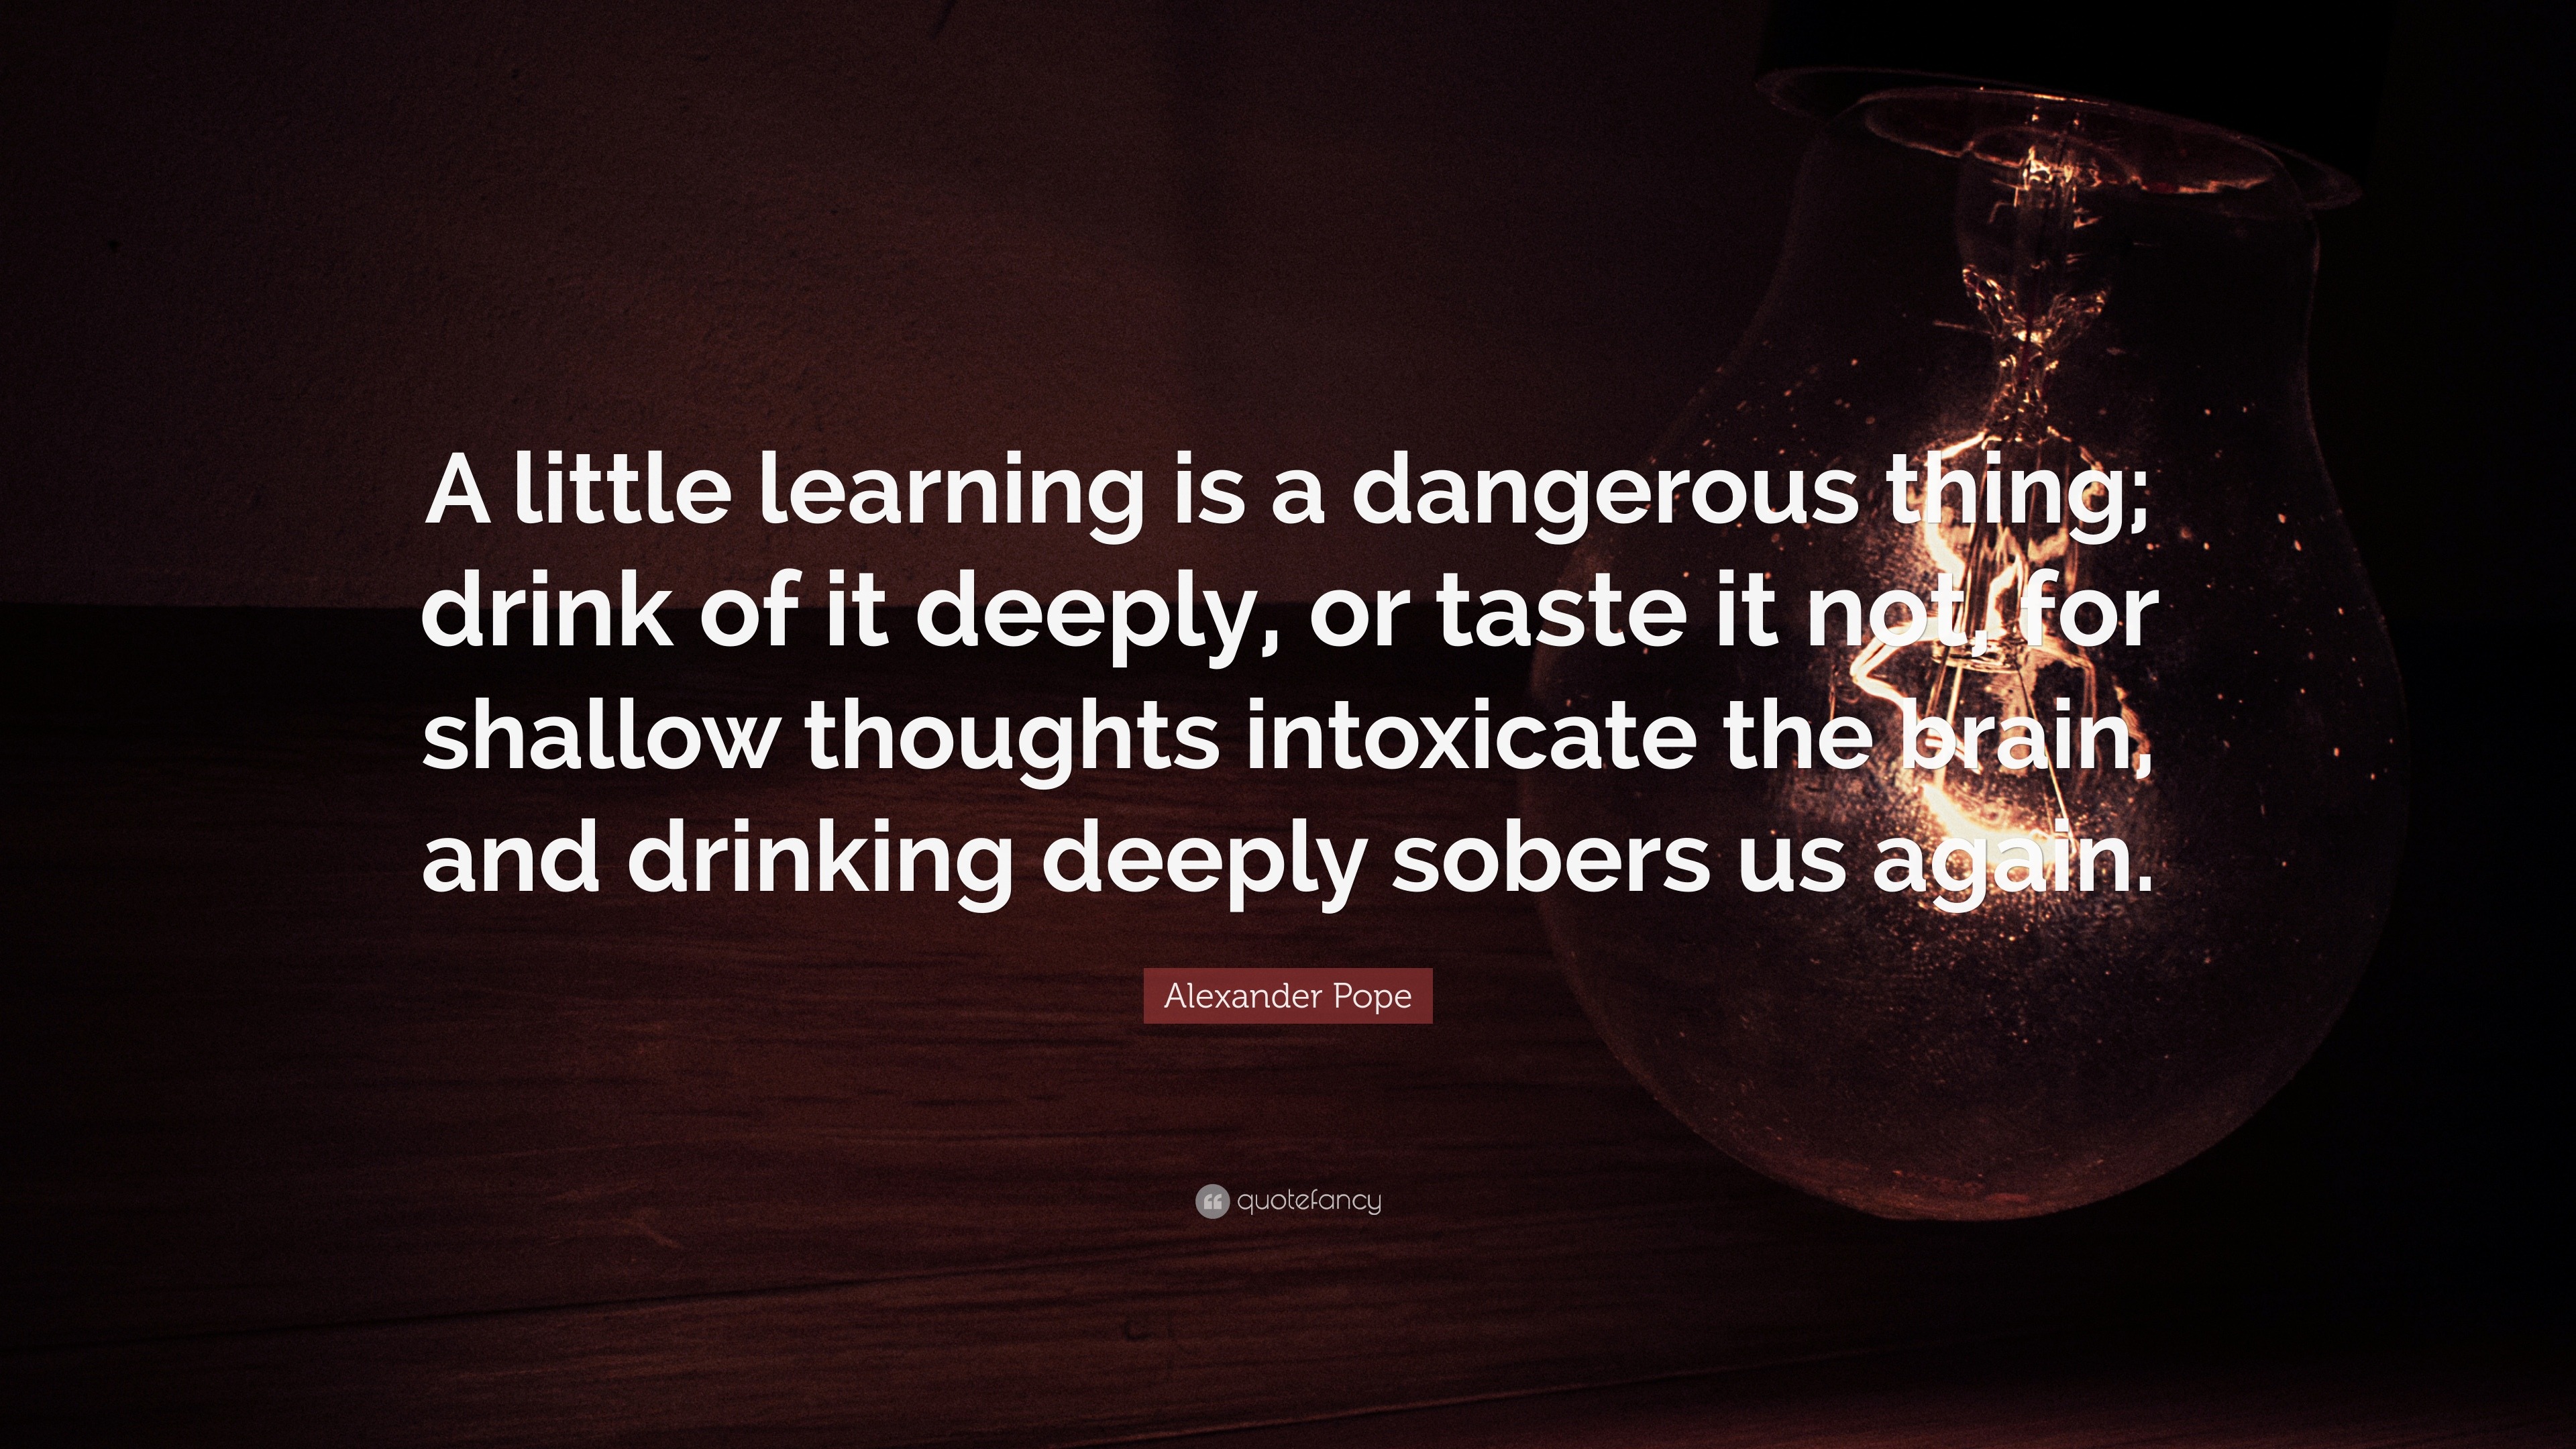 Alexander Pope Quote: “A little learning is a dangerous thing; drink of deeply, or taste it not, for shallow thoughts intoxicate the ...”